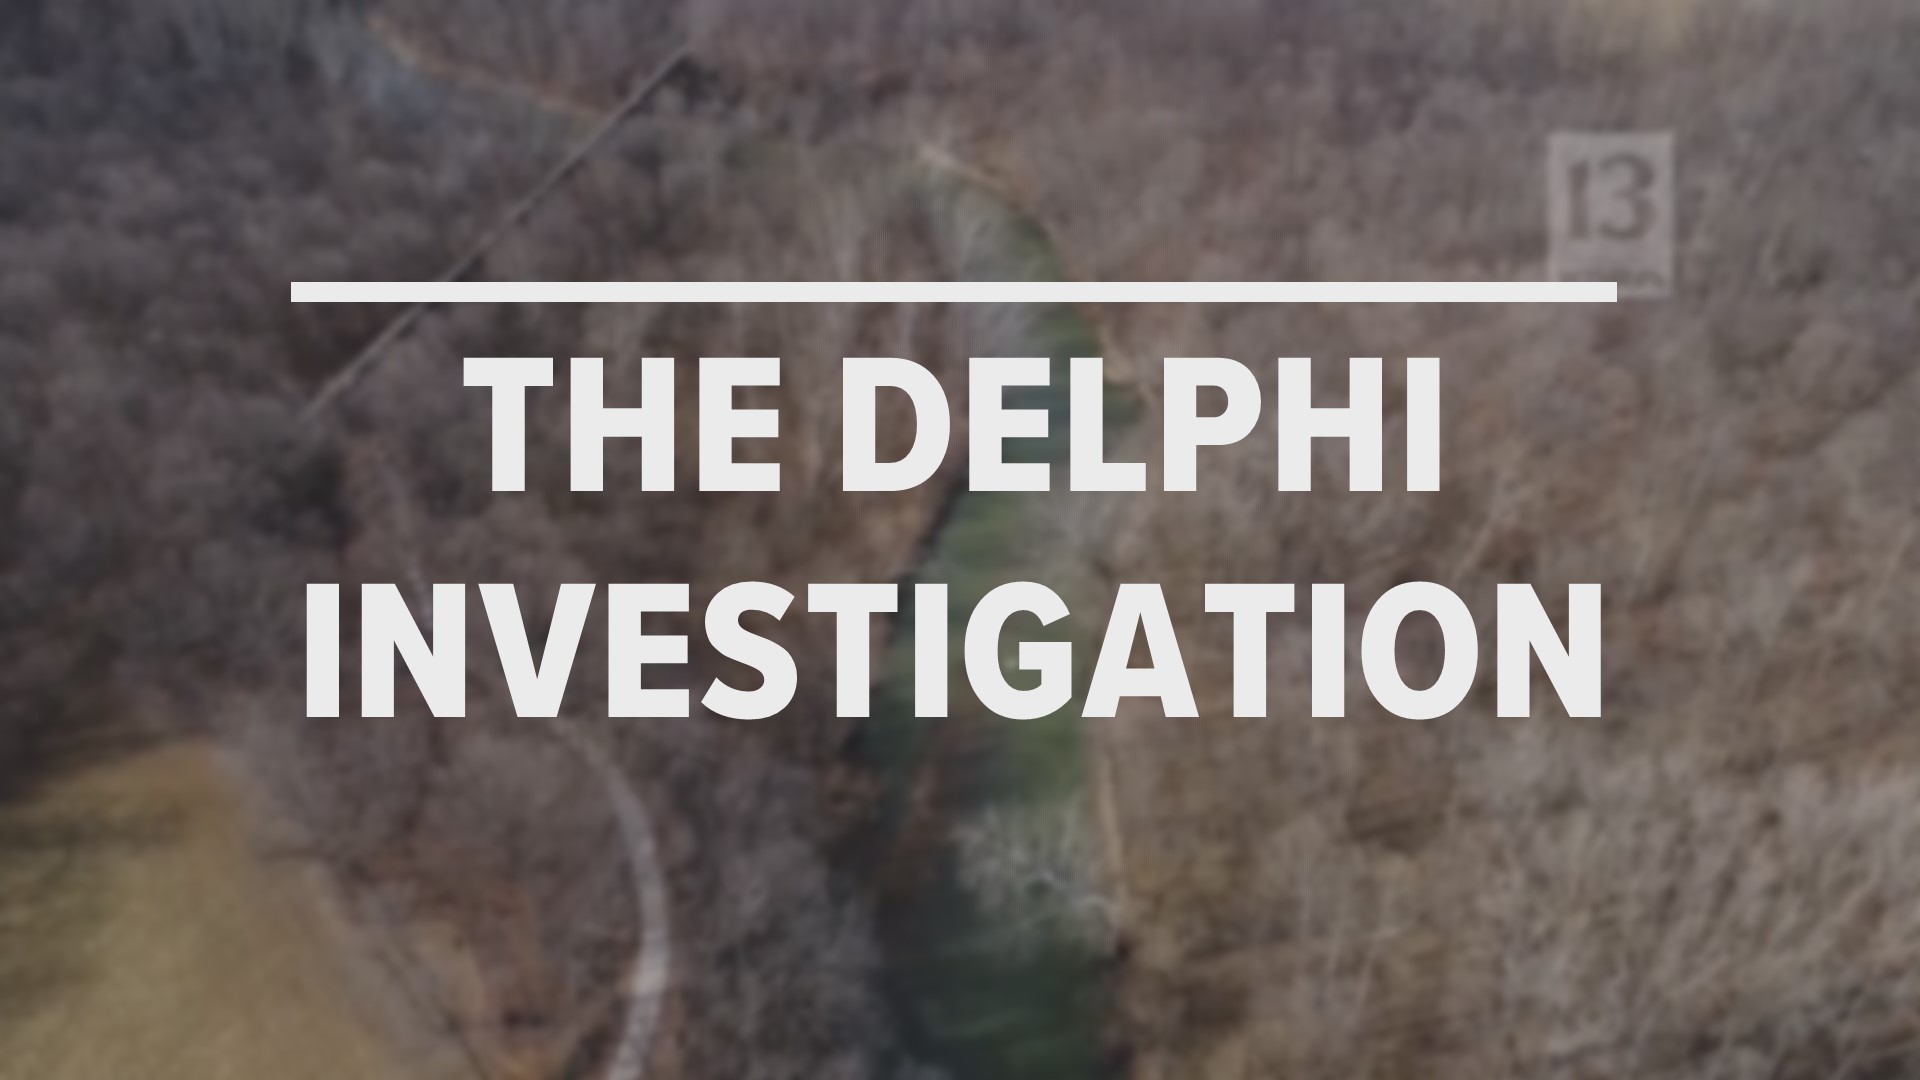 The murders of Abby Williams and Libby German back in 2017 stunned the small town of Delphi. 13 Investigates shows you where the investigation stands now.